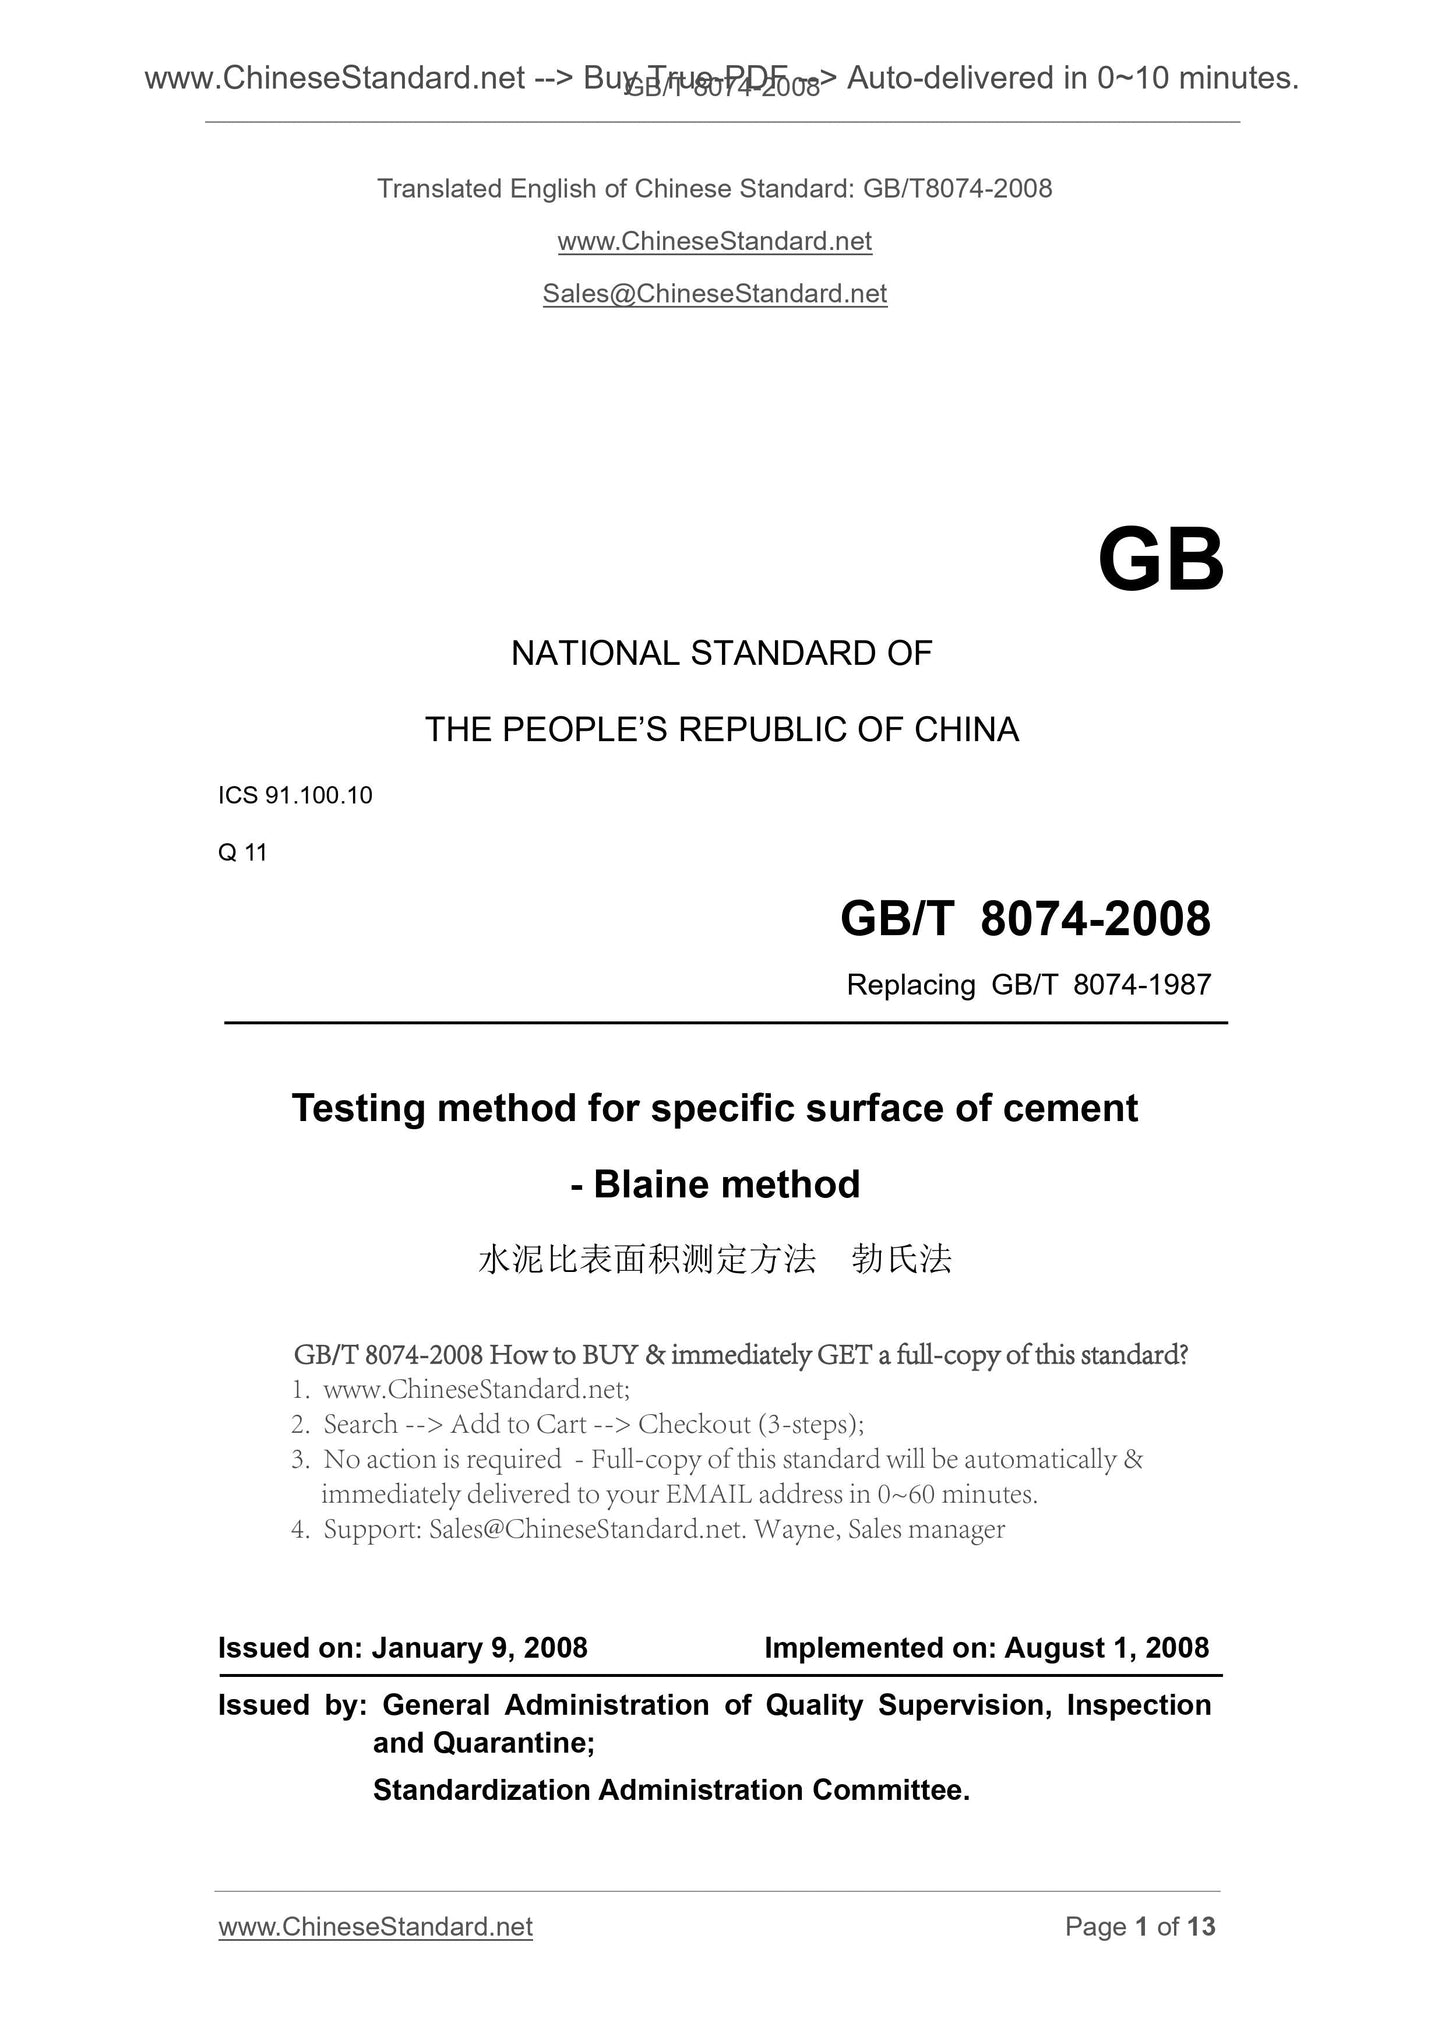 GB/T 8074-2008 Page 1